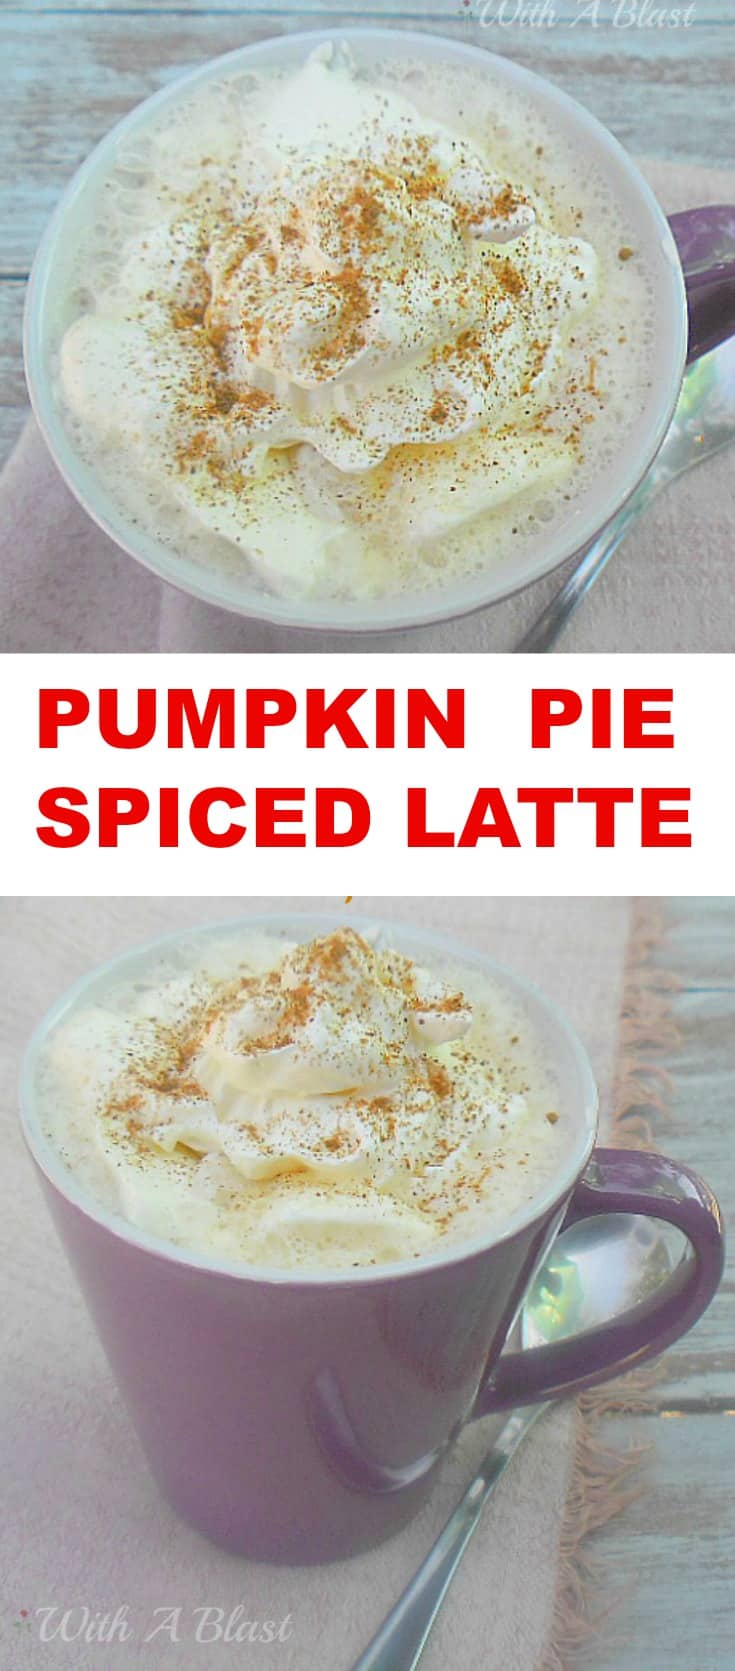 Pumpkin Pie Spiced Latte ~ Warm, frothy Latte spiked with Pumpkin Pie Spice ~ perfect cold weather drink #HotDrinks #HotBeverage #Latte #Coffee